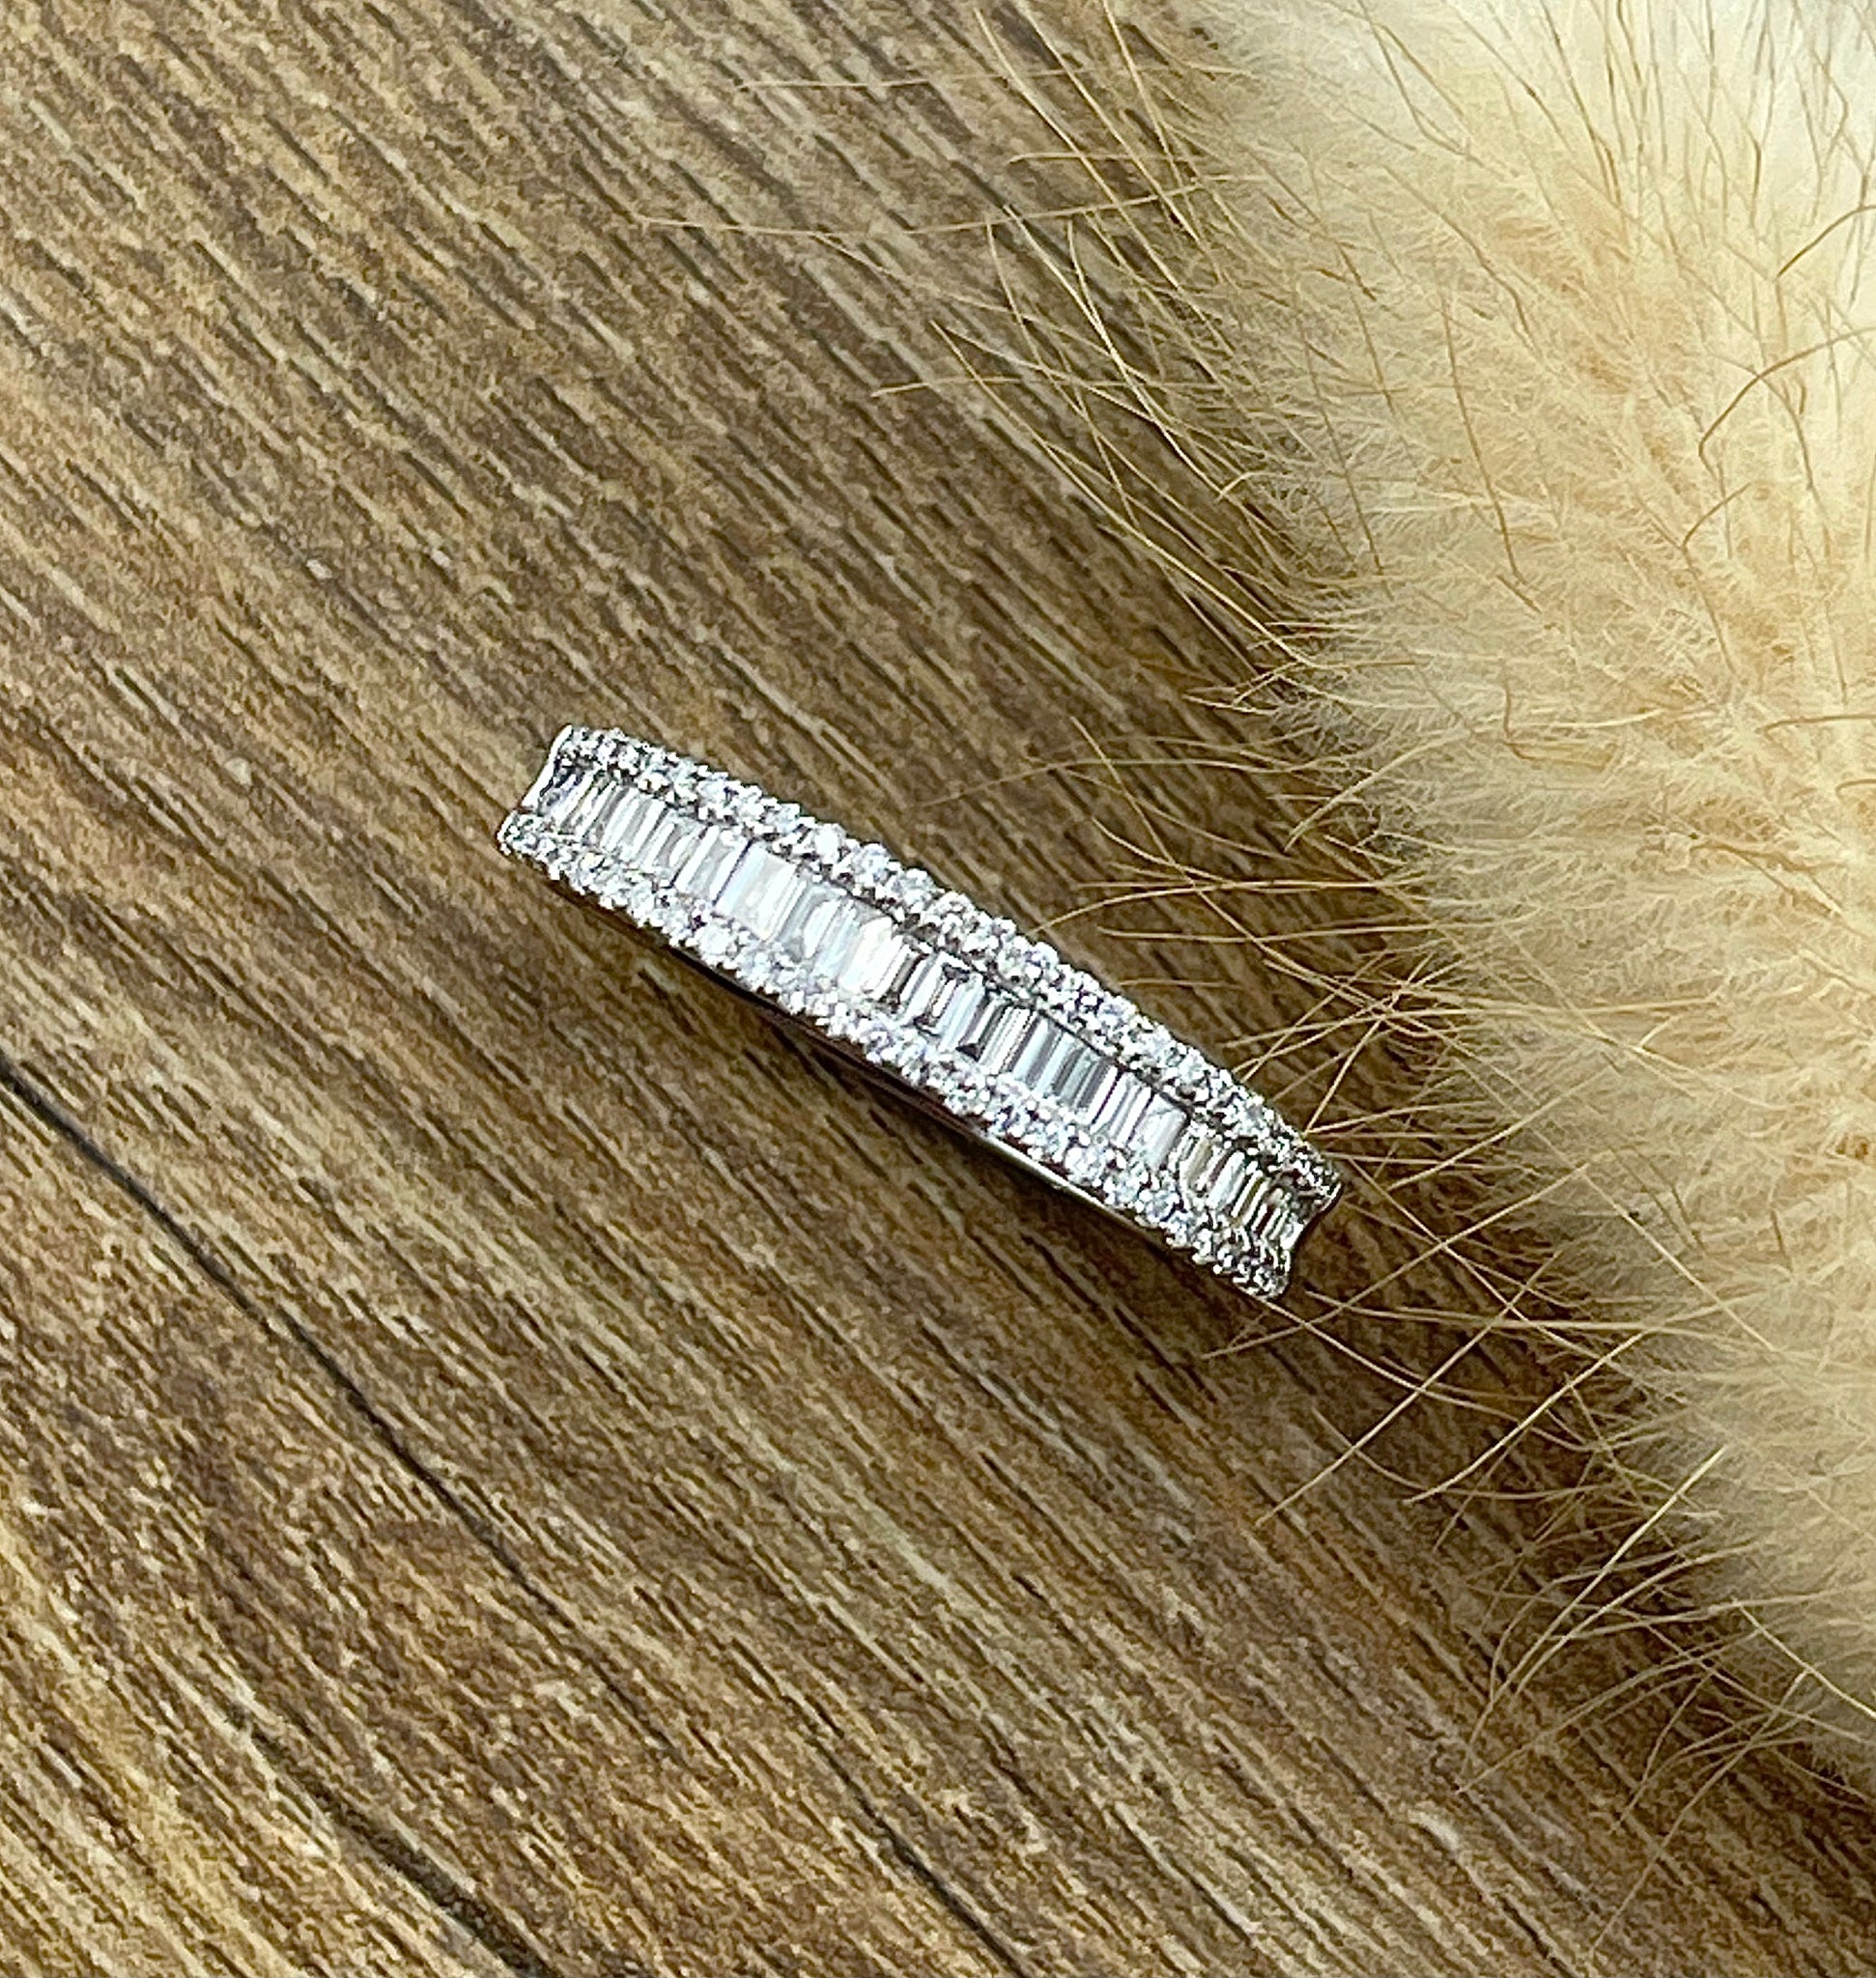 Baguette and round diamond band